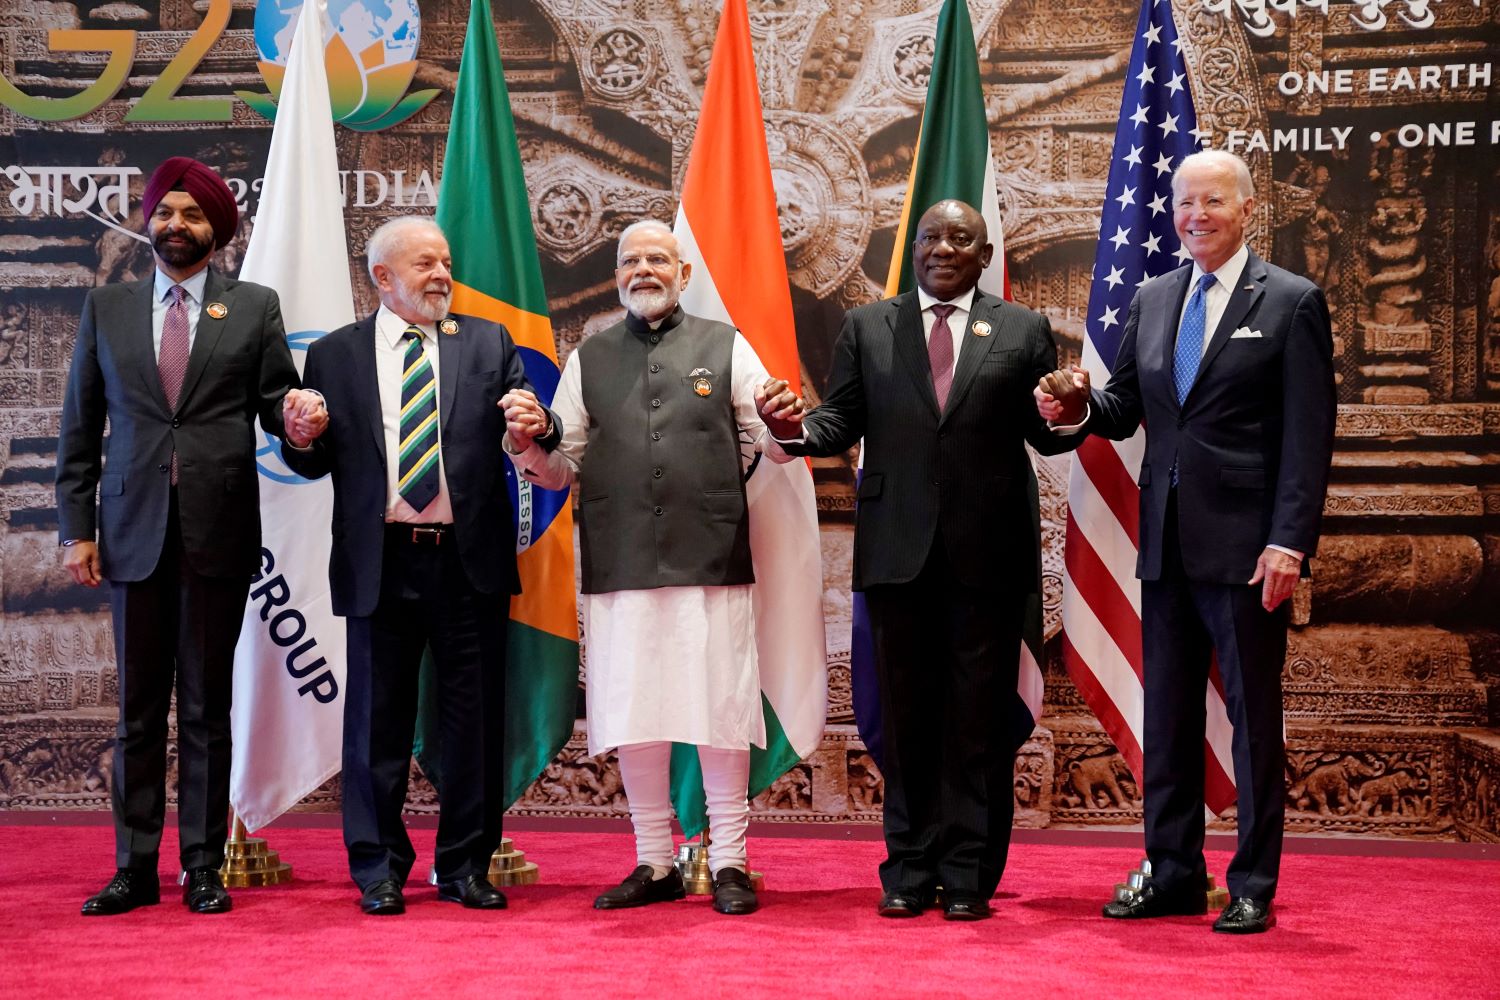 World Bank President Ajay Banga, Brazilian President Luiz Inacio Lula da Silva, Indian Prime Minister Narendra Modi, South African President Cyril Ramaphosa, and U.S. President Joe Biden hold hands on a red carpet with representative flags behind them, posing for a group photo during G20 Summit in New Delhi, India on Saturday, September 9, 2023.